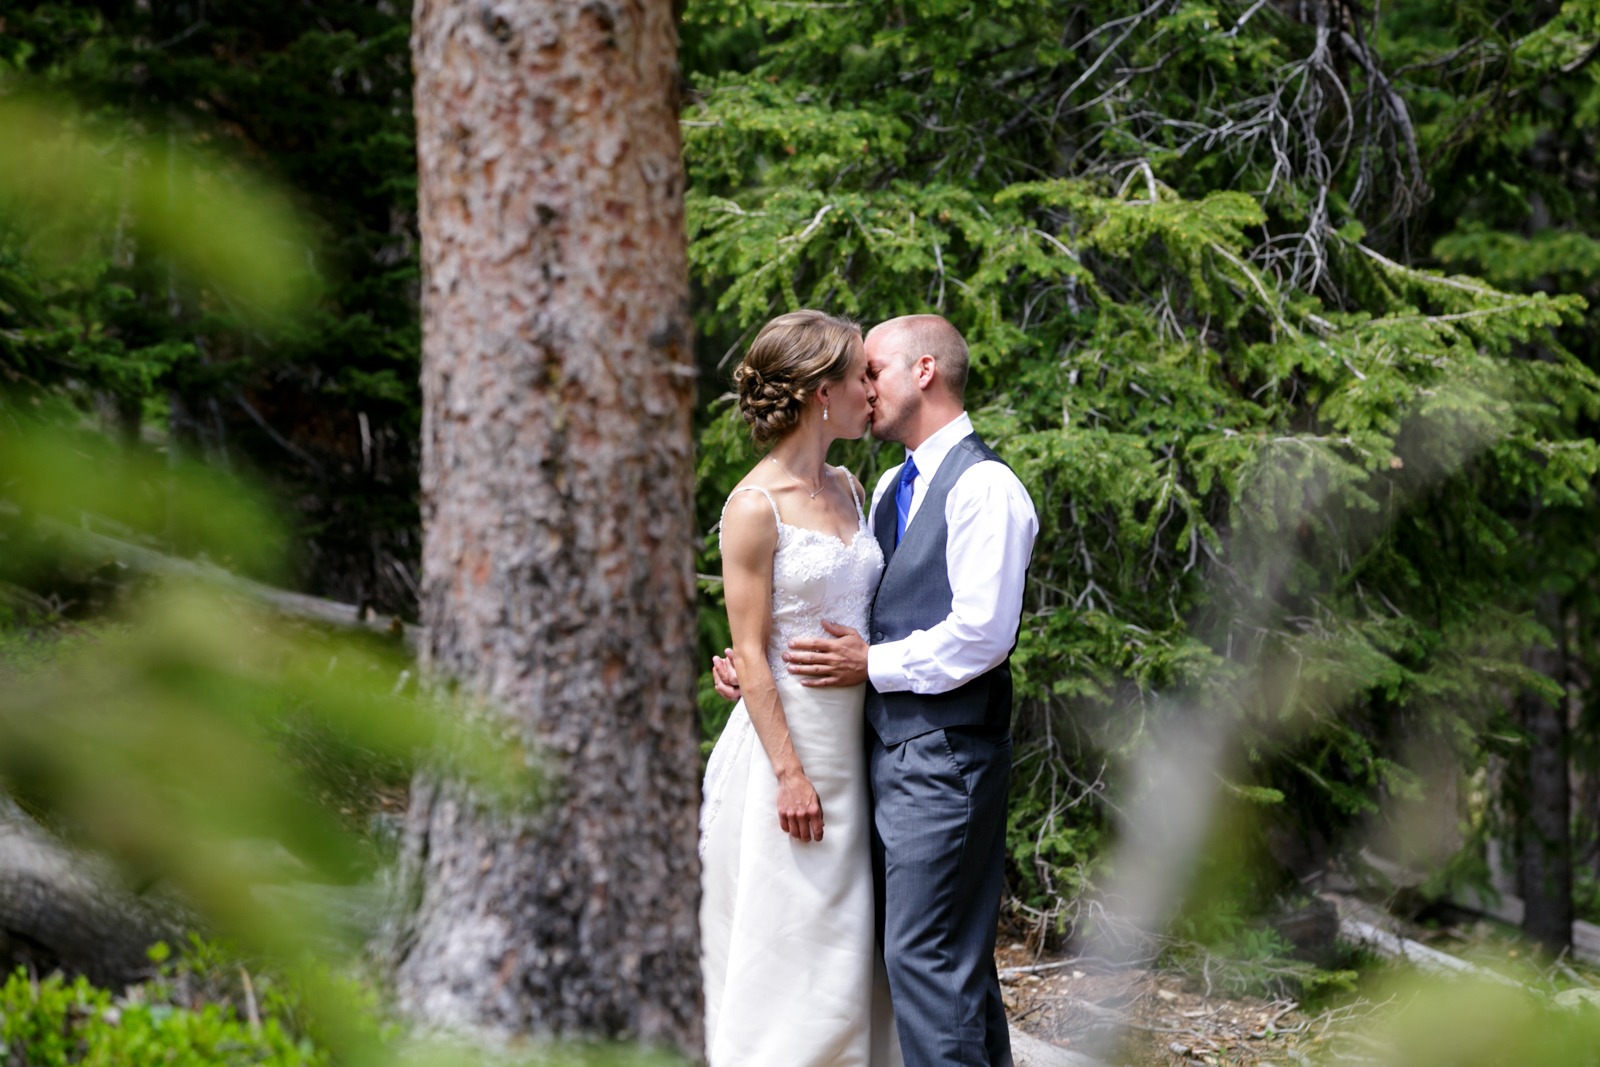 a bride and groom kiss by an old tree trunk